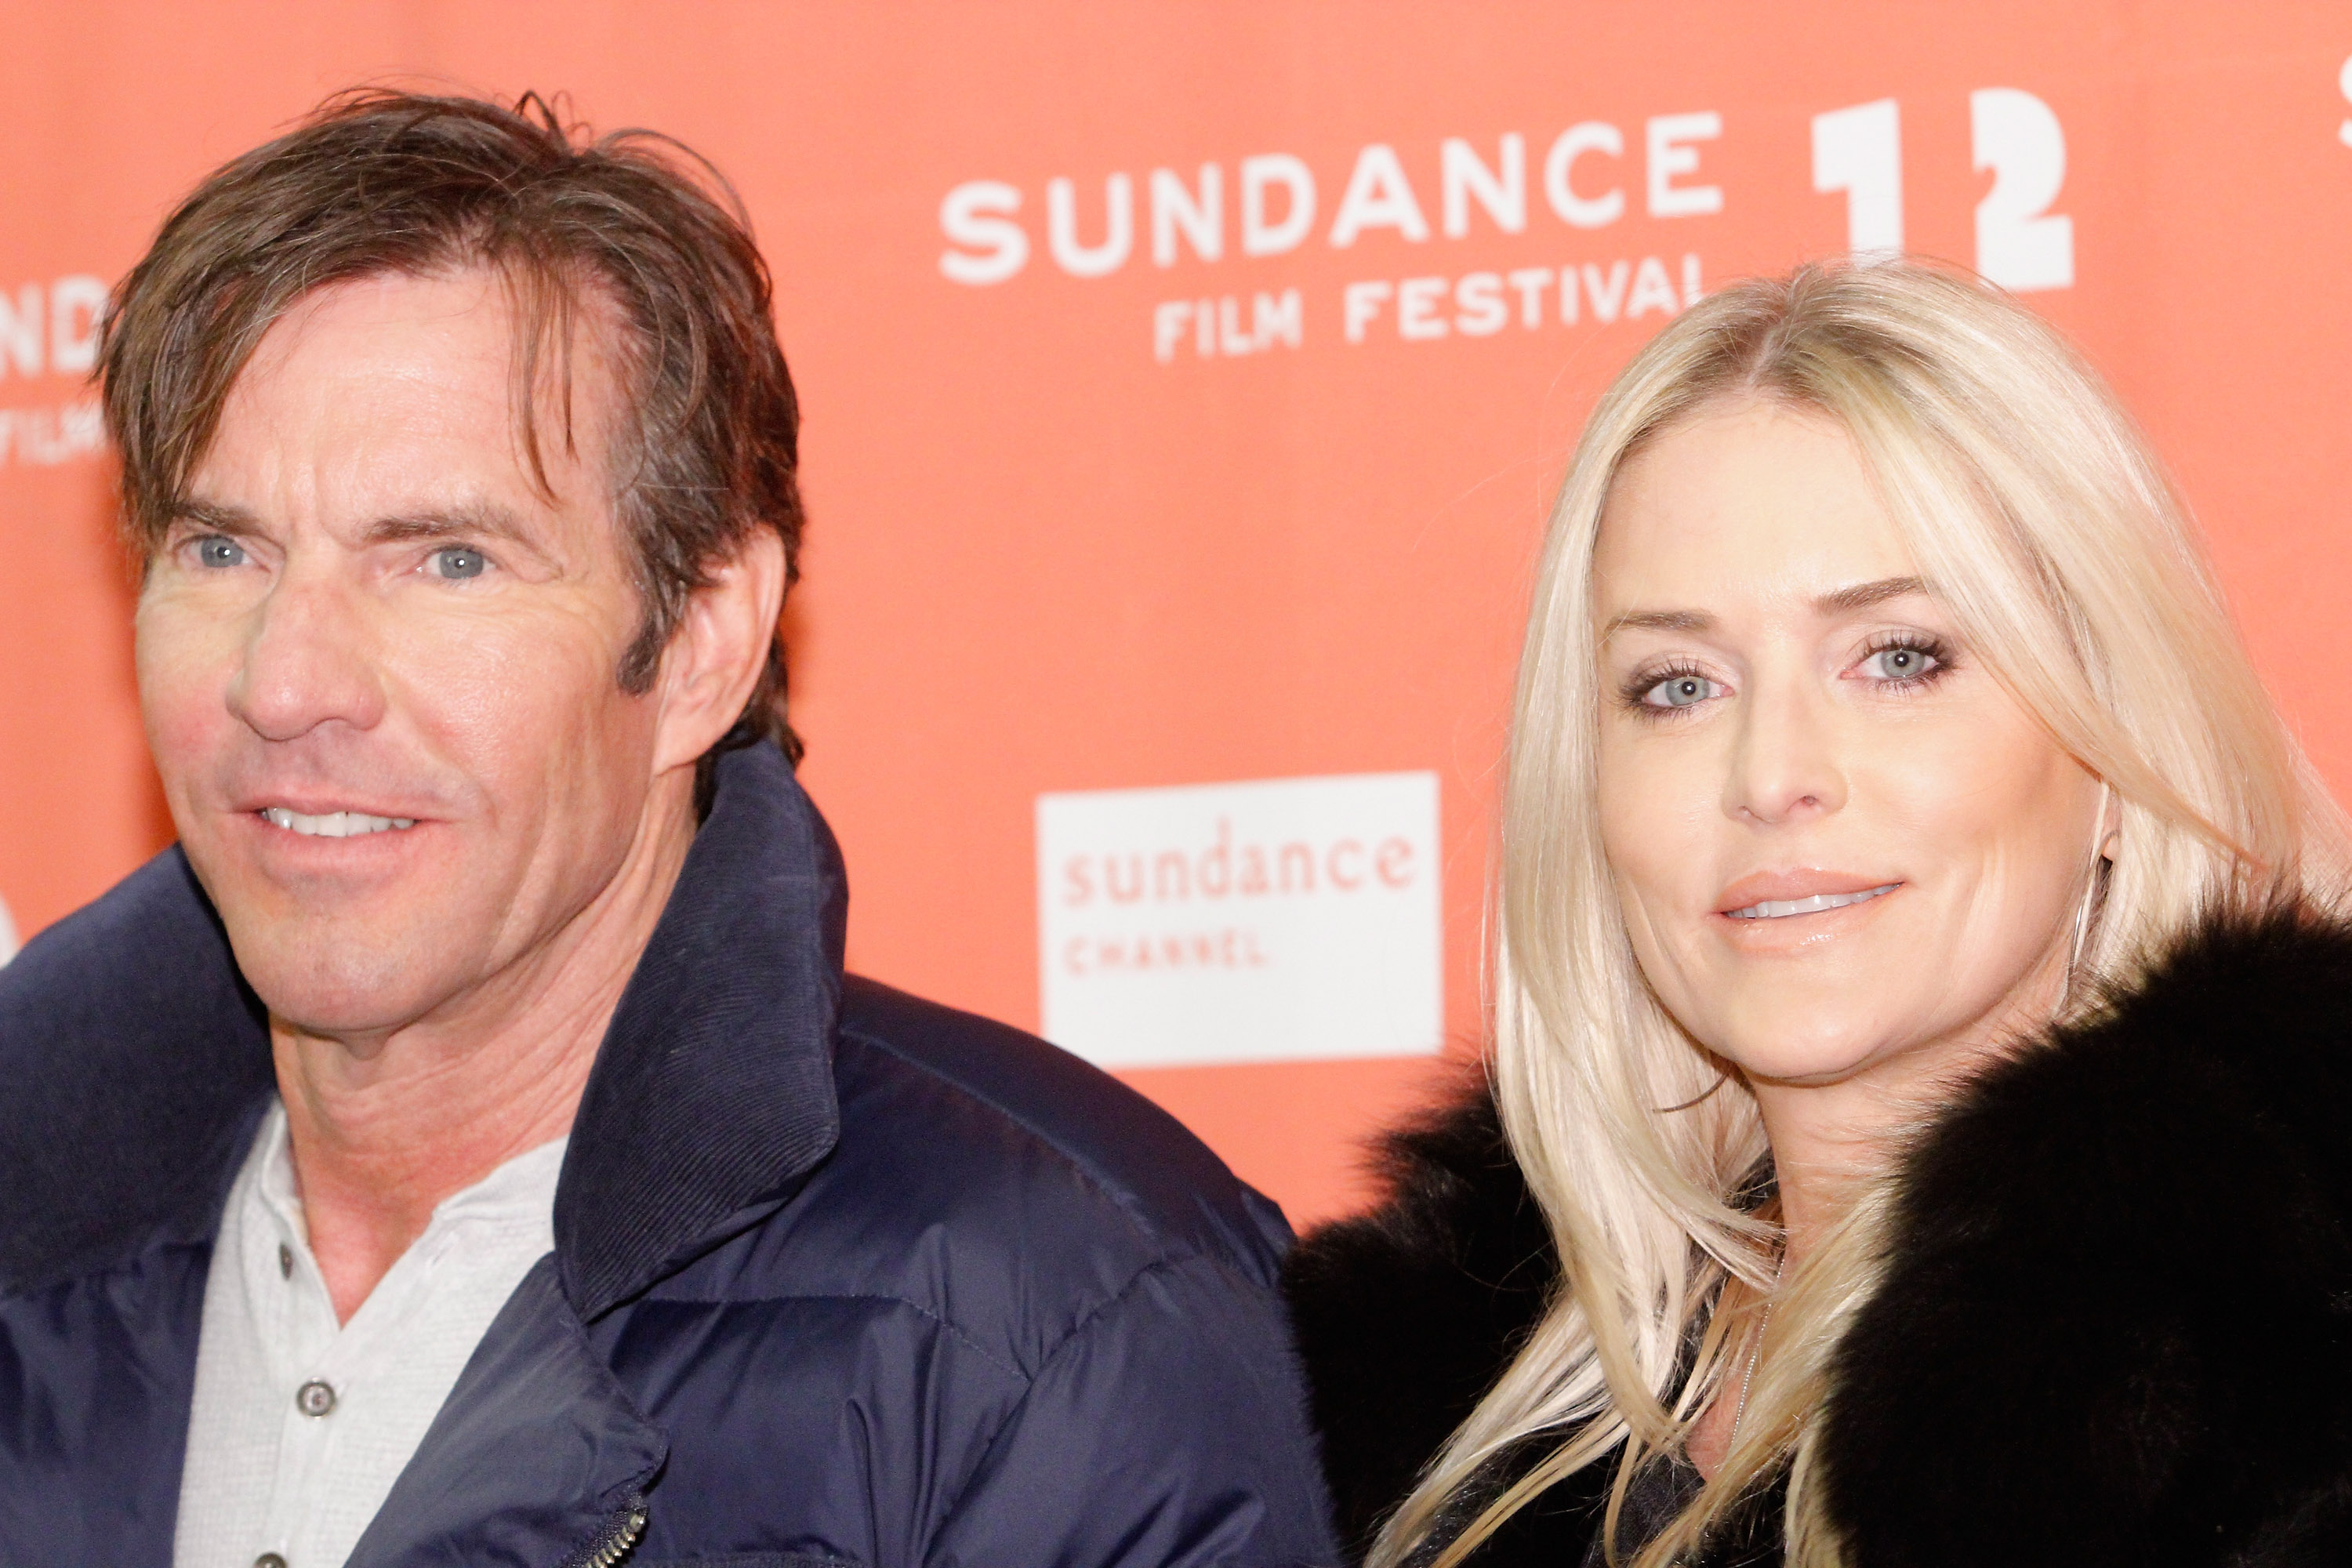 Dennis Quaid and Kimberly Buffington attend the Sundance Film Festival on January 27, 2012 | Source: Getty Images